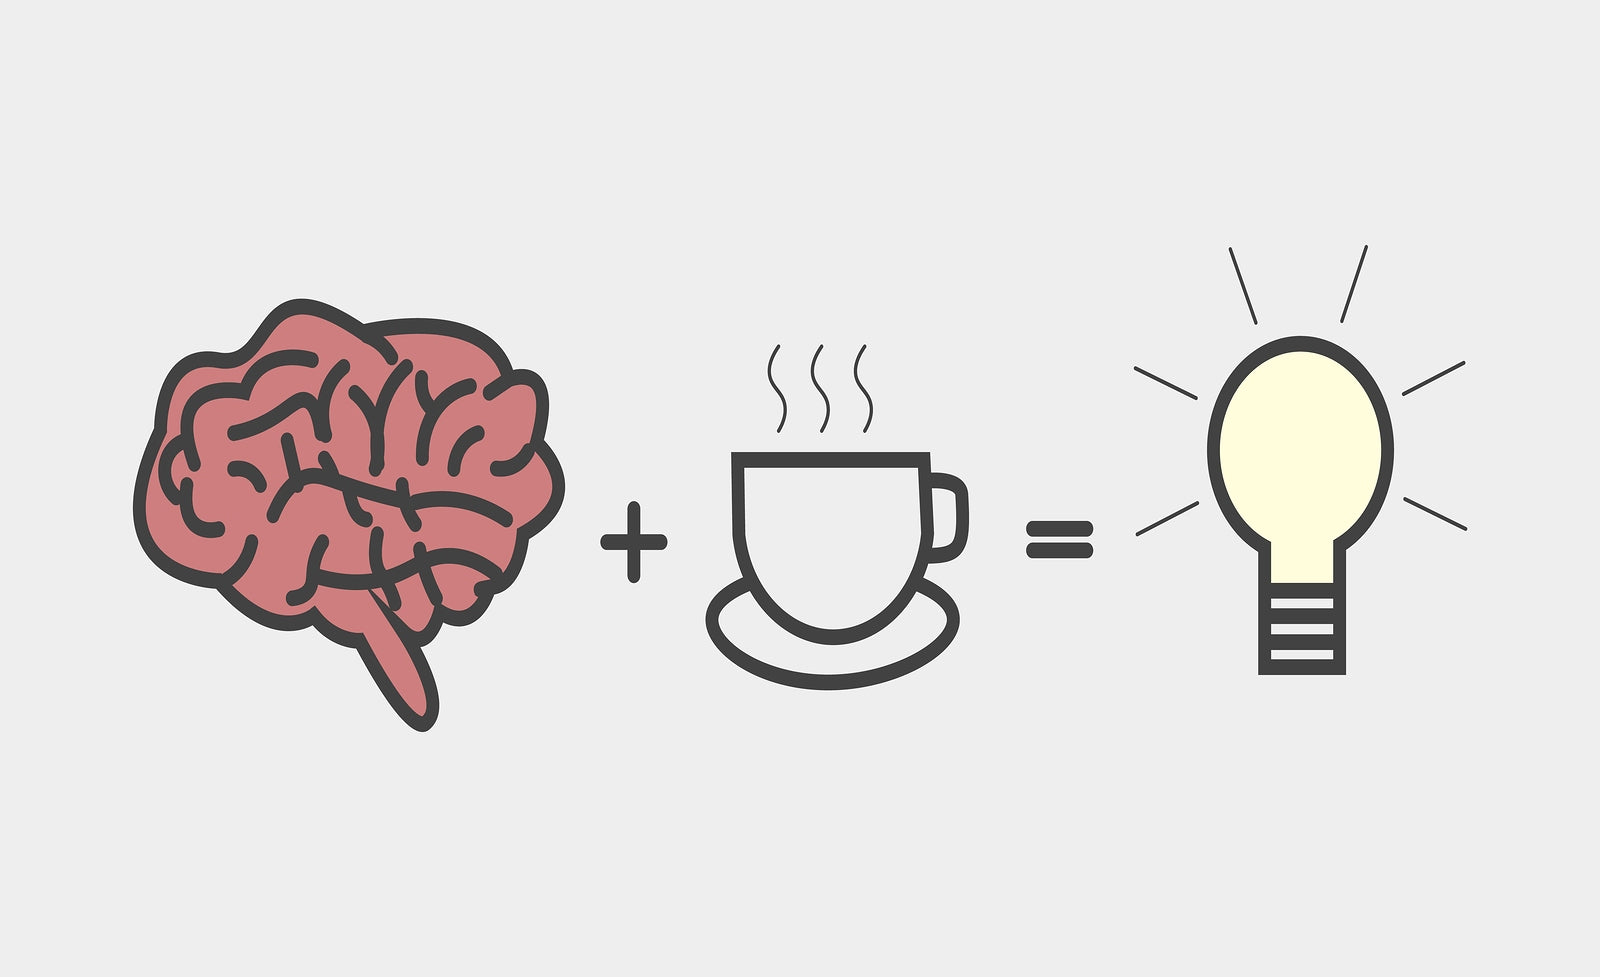 an image showing a brain and cup of coffee next to a light switch